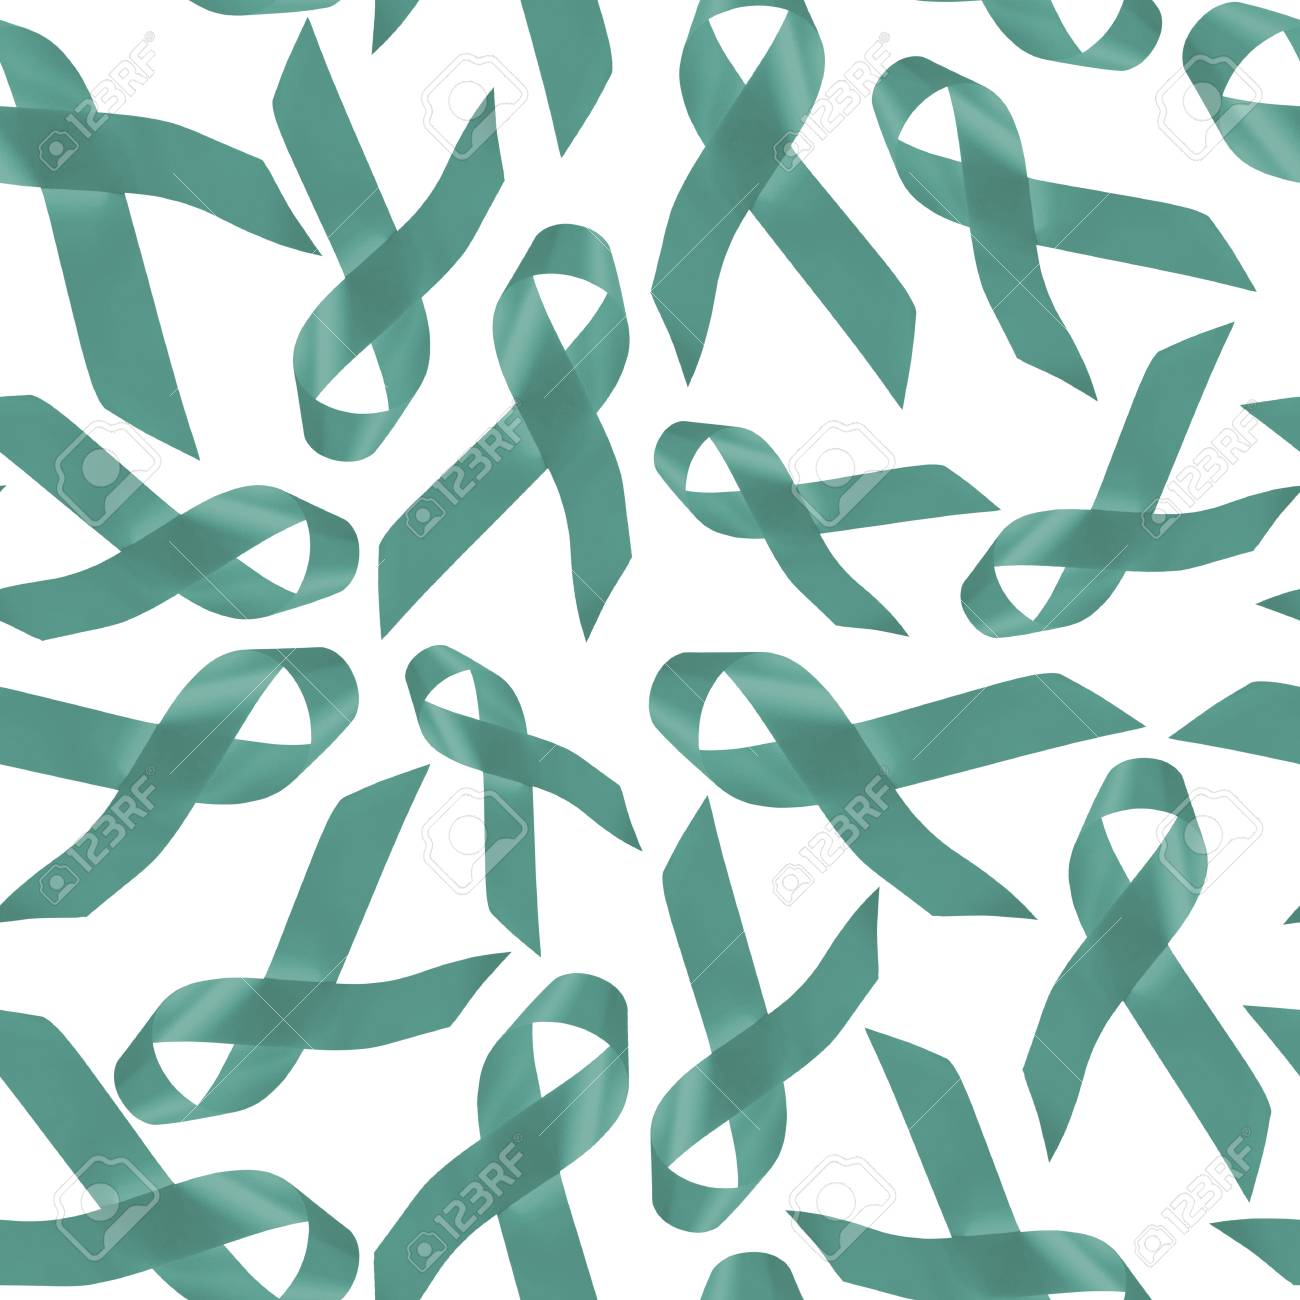 Cervical Cancer Awareness Background Seamless Pattern Made Of